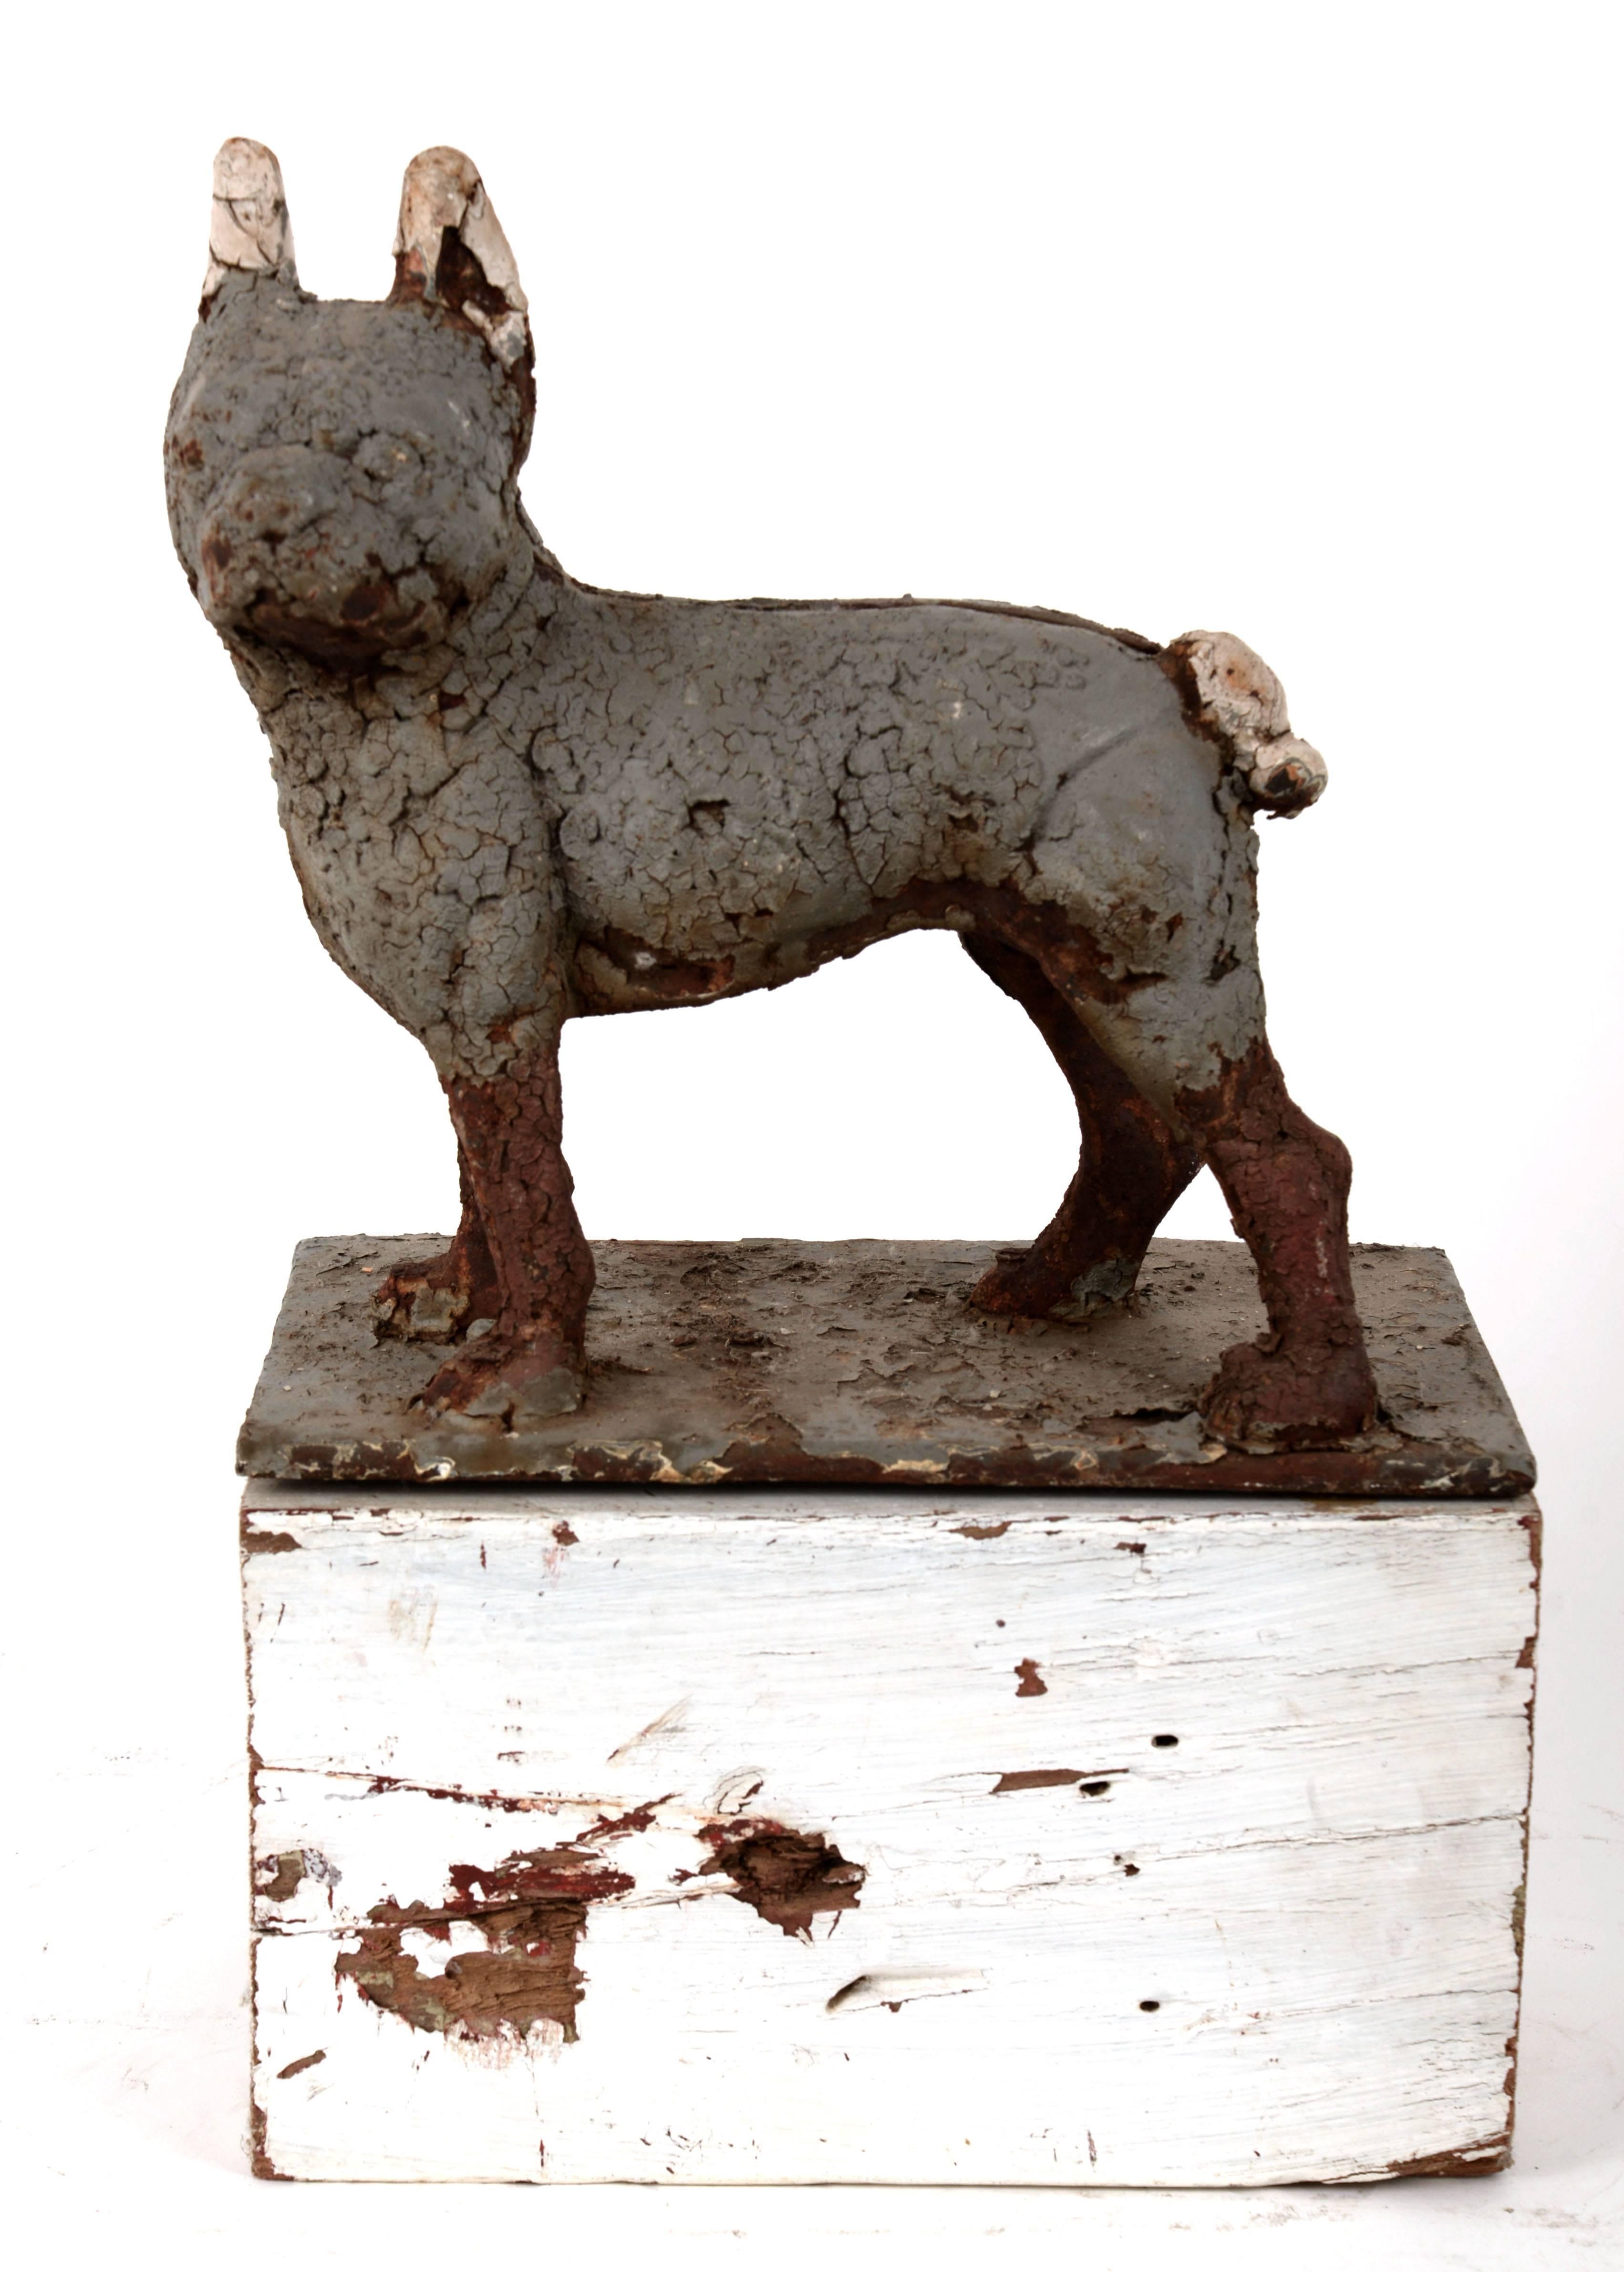 Heavily distressed cast iron Boston Terrier with remnants of gray and white paint. The dog and the cast iron plate are attached to a crudely cut and painted white block of wood.